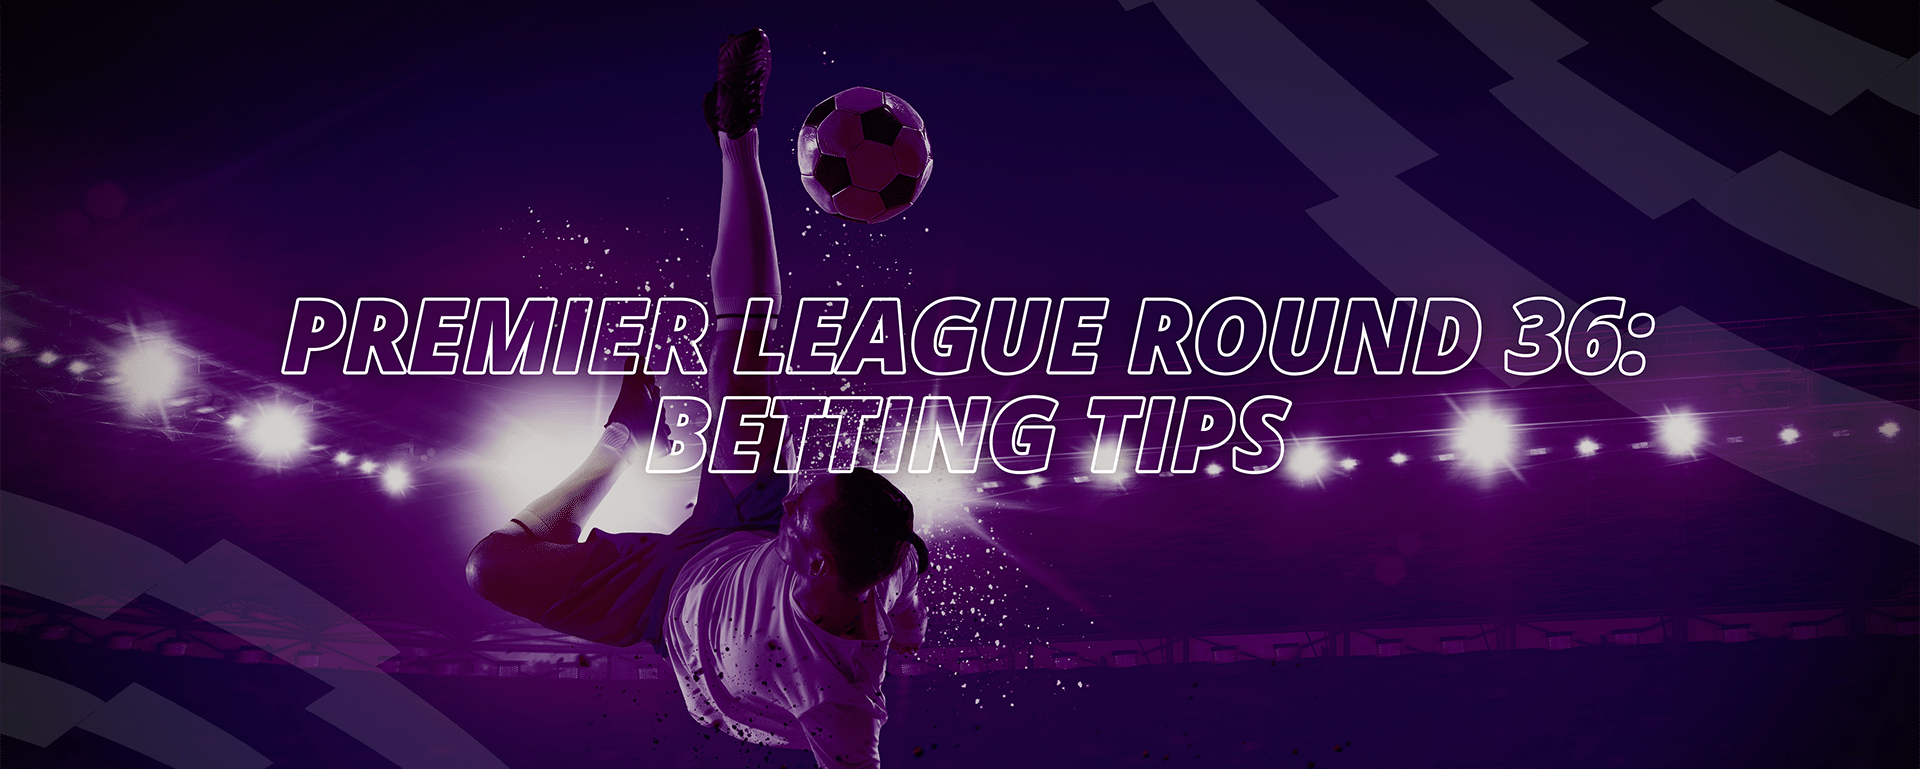 PREMIER LEAGUE ROUND 36: BETTING TIPS